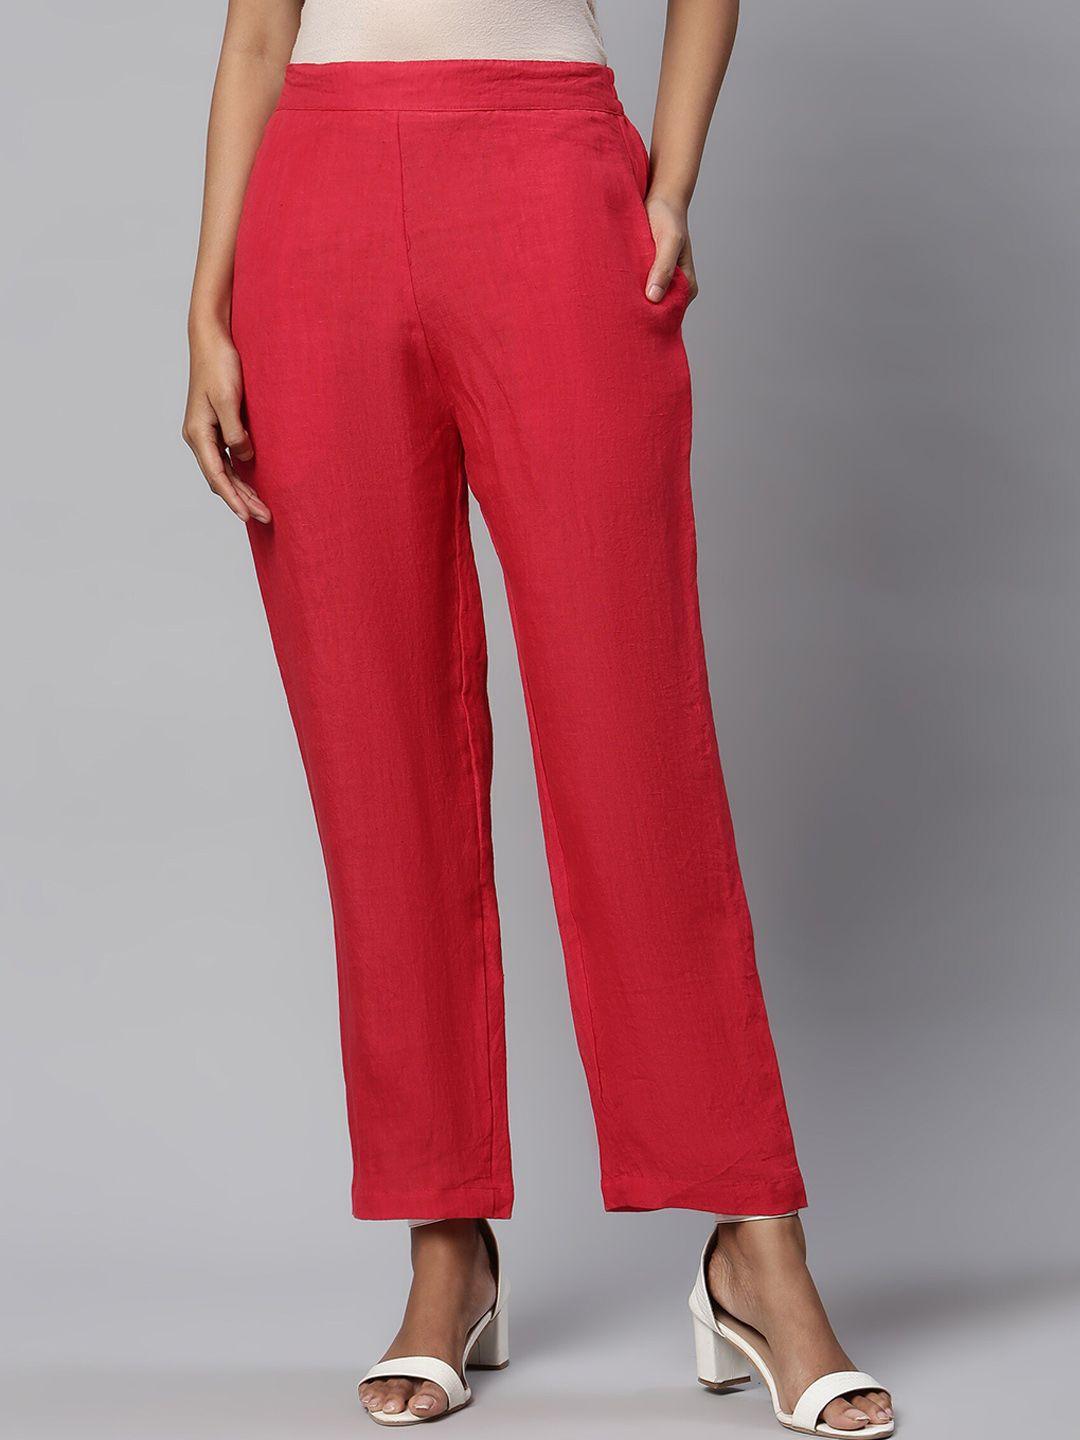 linen club woman women red solid lounge pants